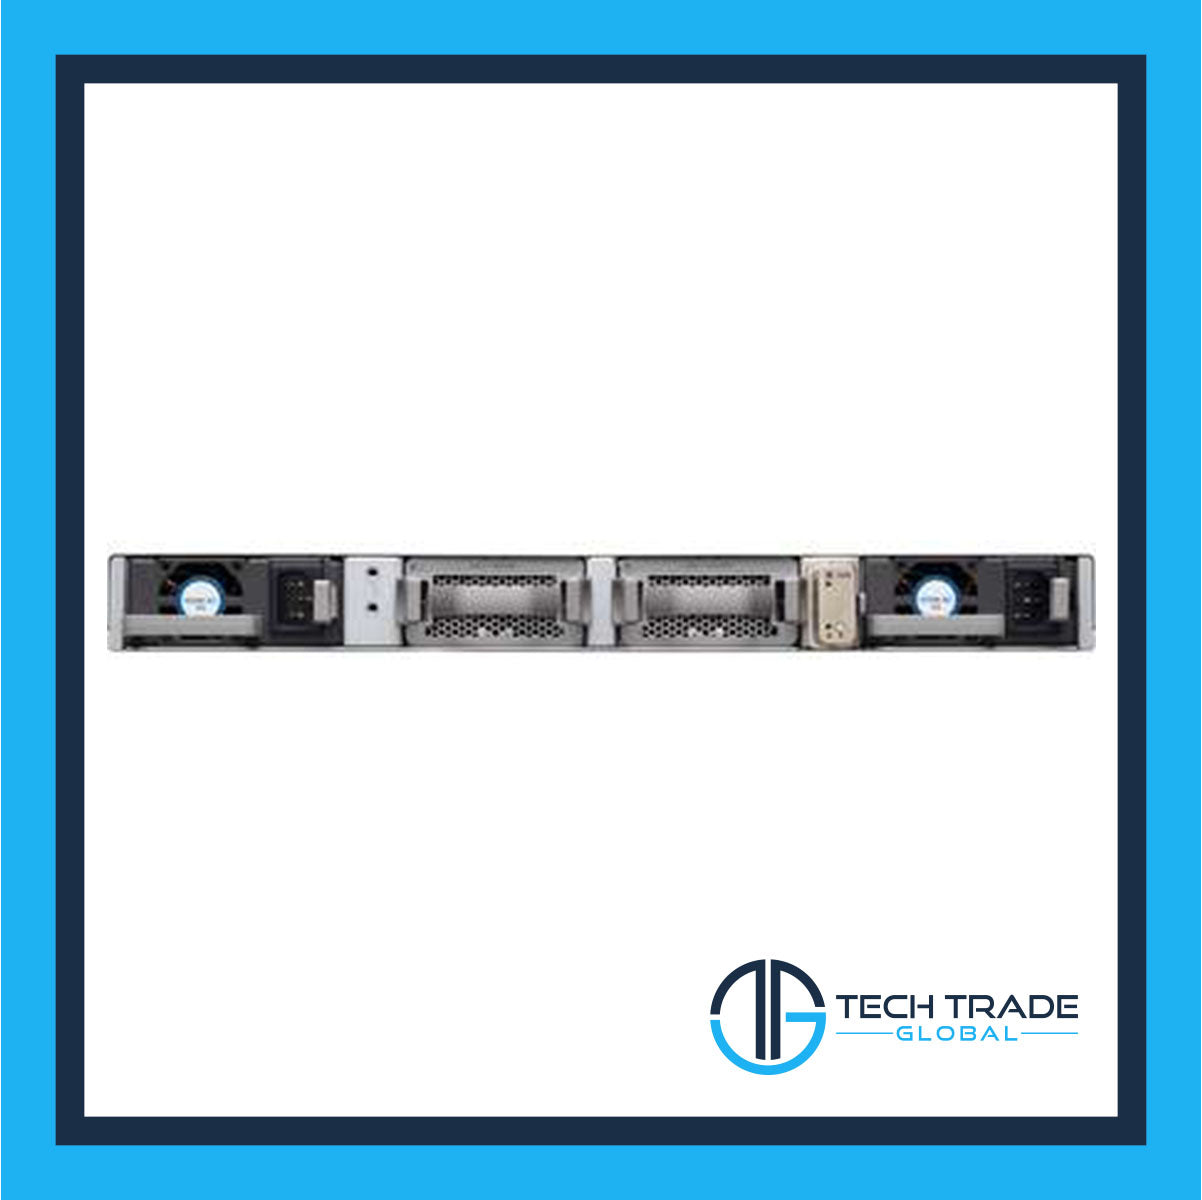 C9500-24Y4C-A | Cisco Catalyst 9500 - Network Advantage - switch - 24 ports - managed - rack-mountable